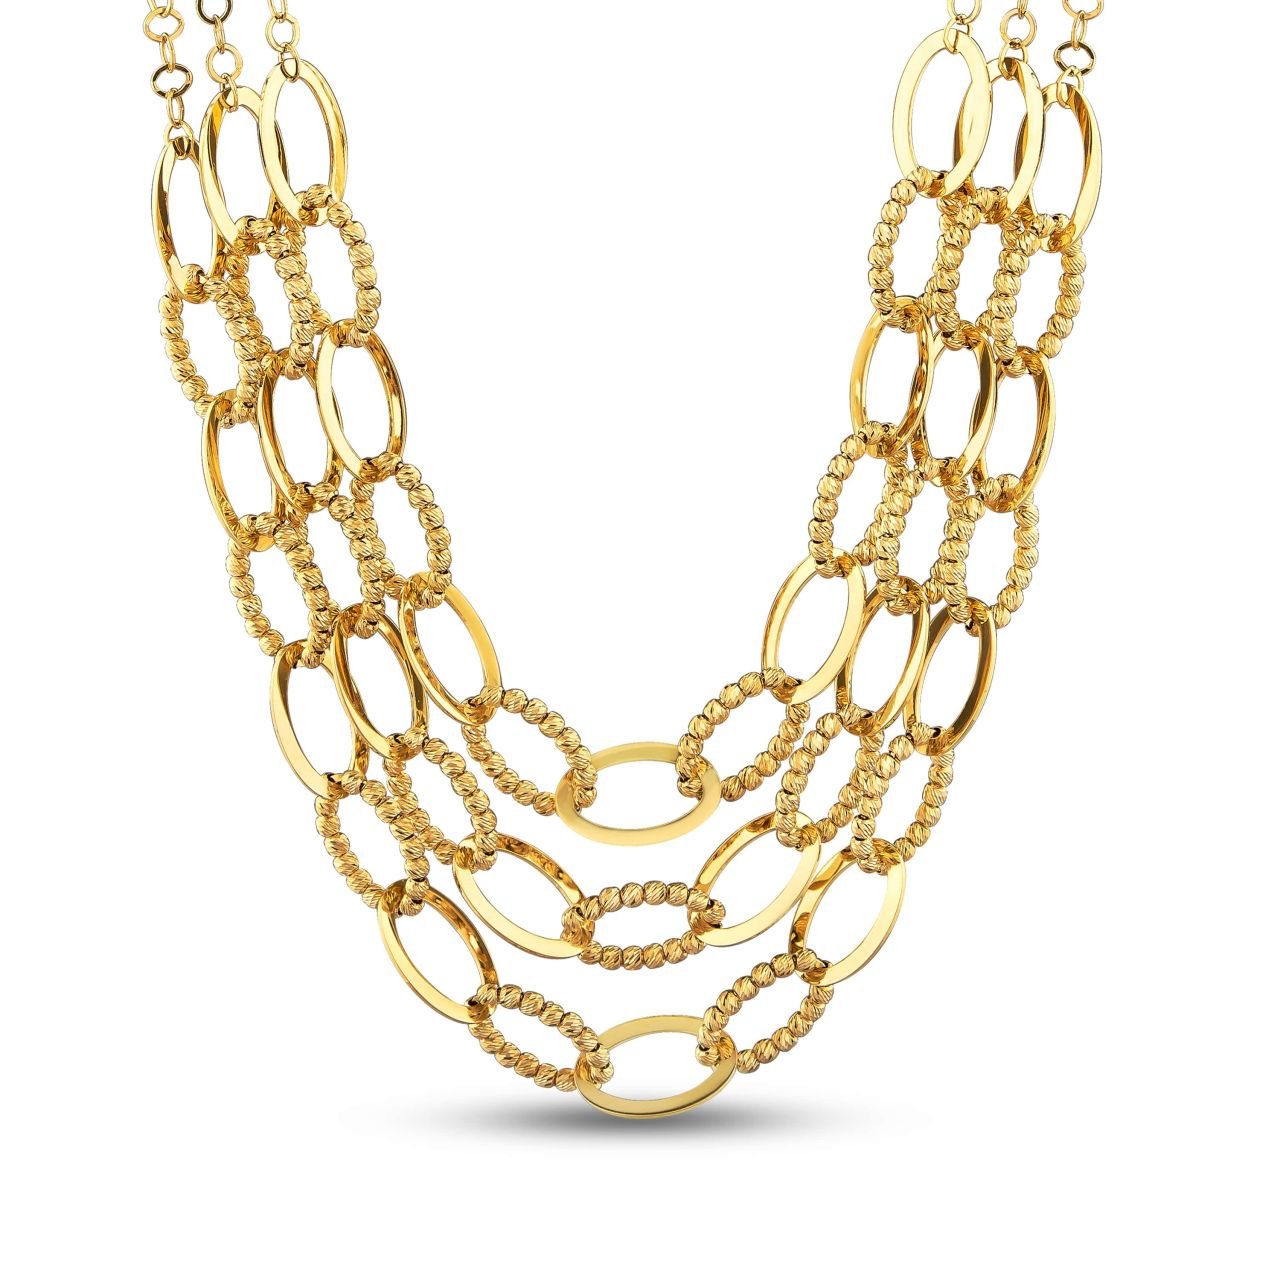 22.50g of 03 KL Gold Necklace